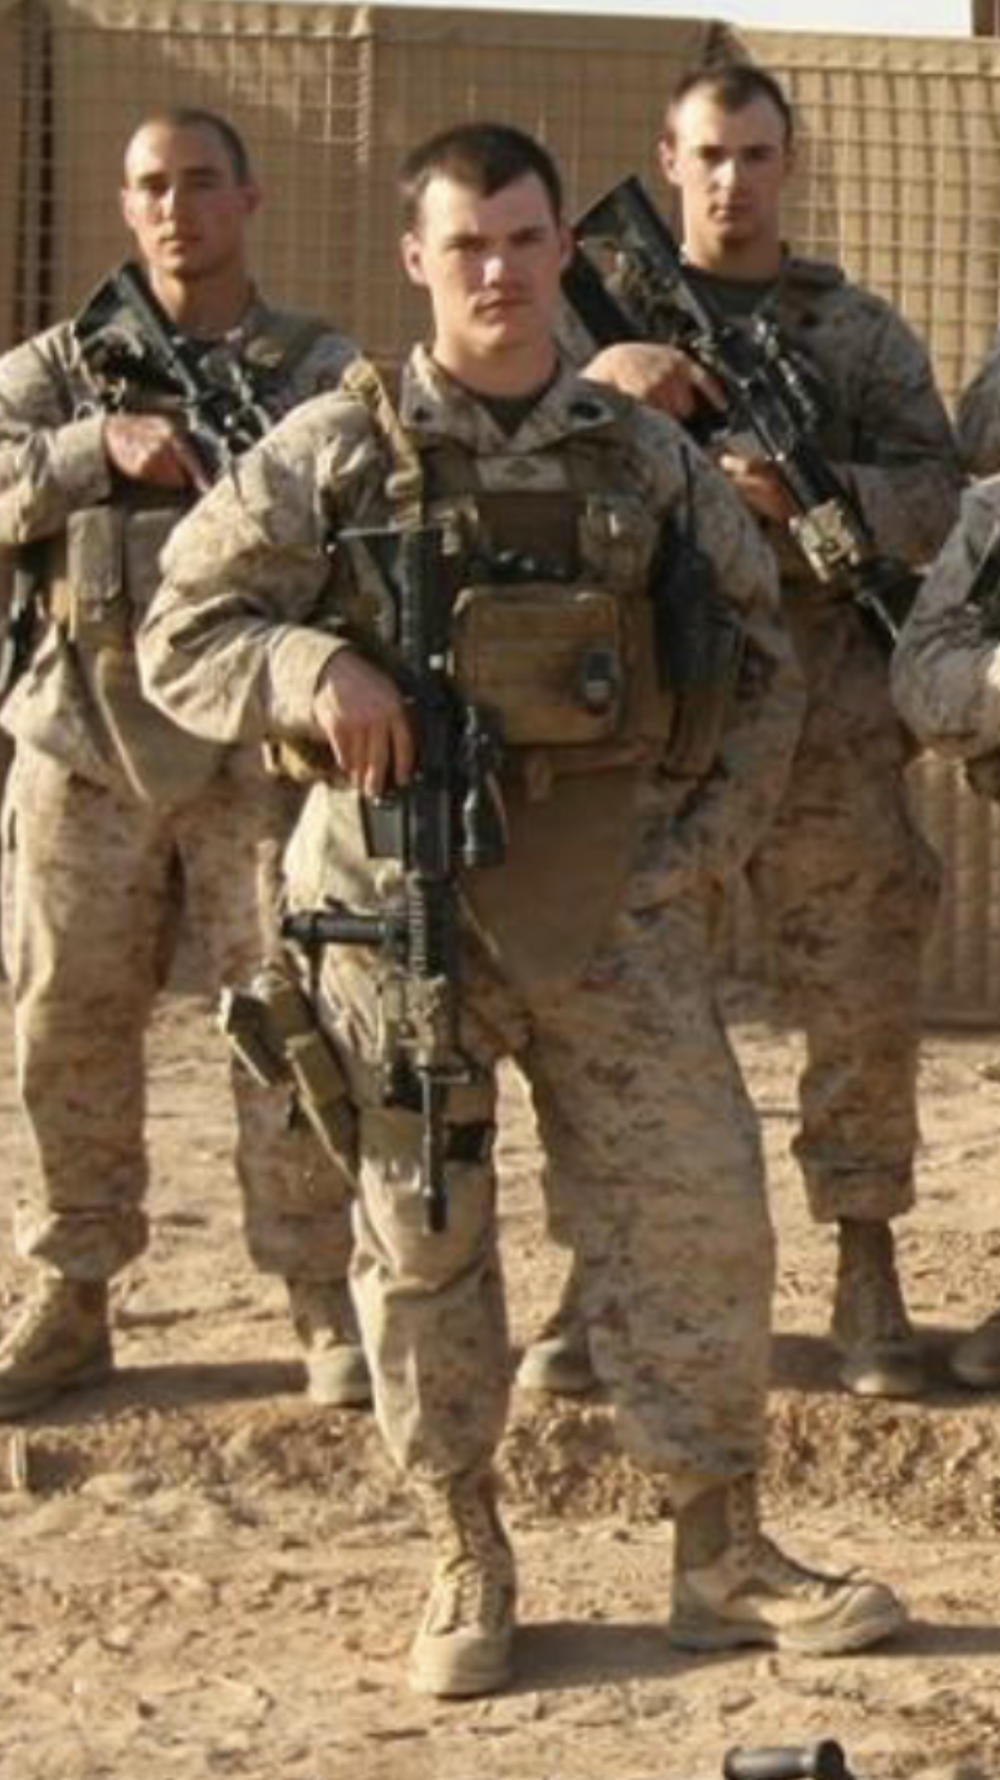 Hardebeck was a 22-year-old Navy hospital corpsman assigned to the 1st Battalion, 6th Marine Regiment in Afghanistan.